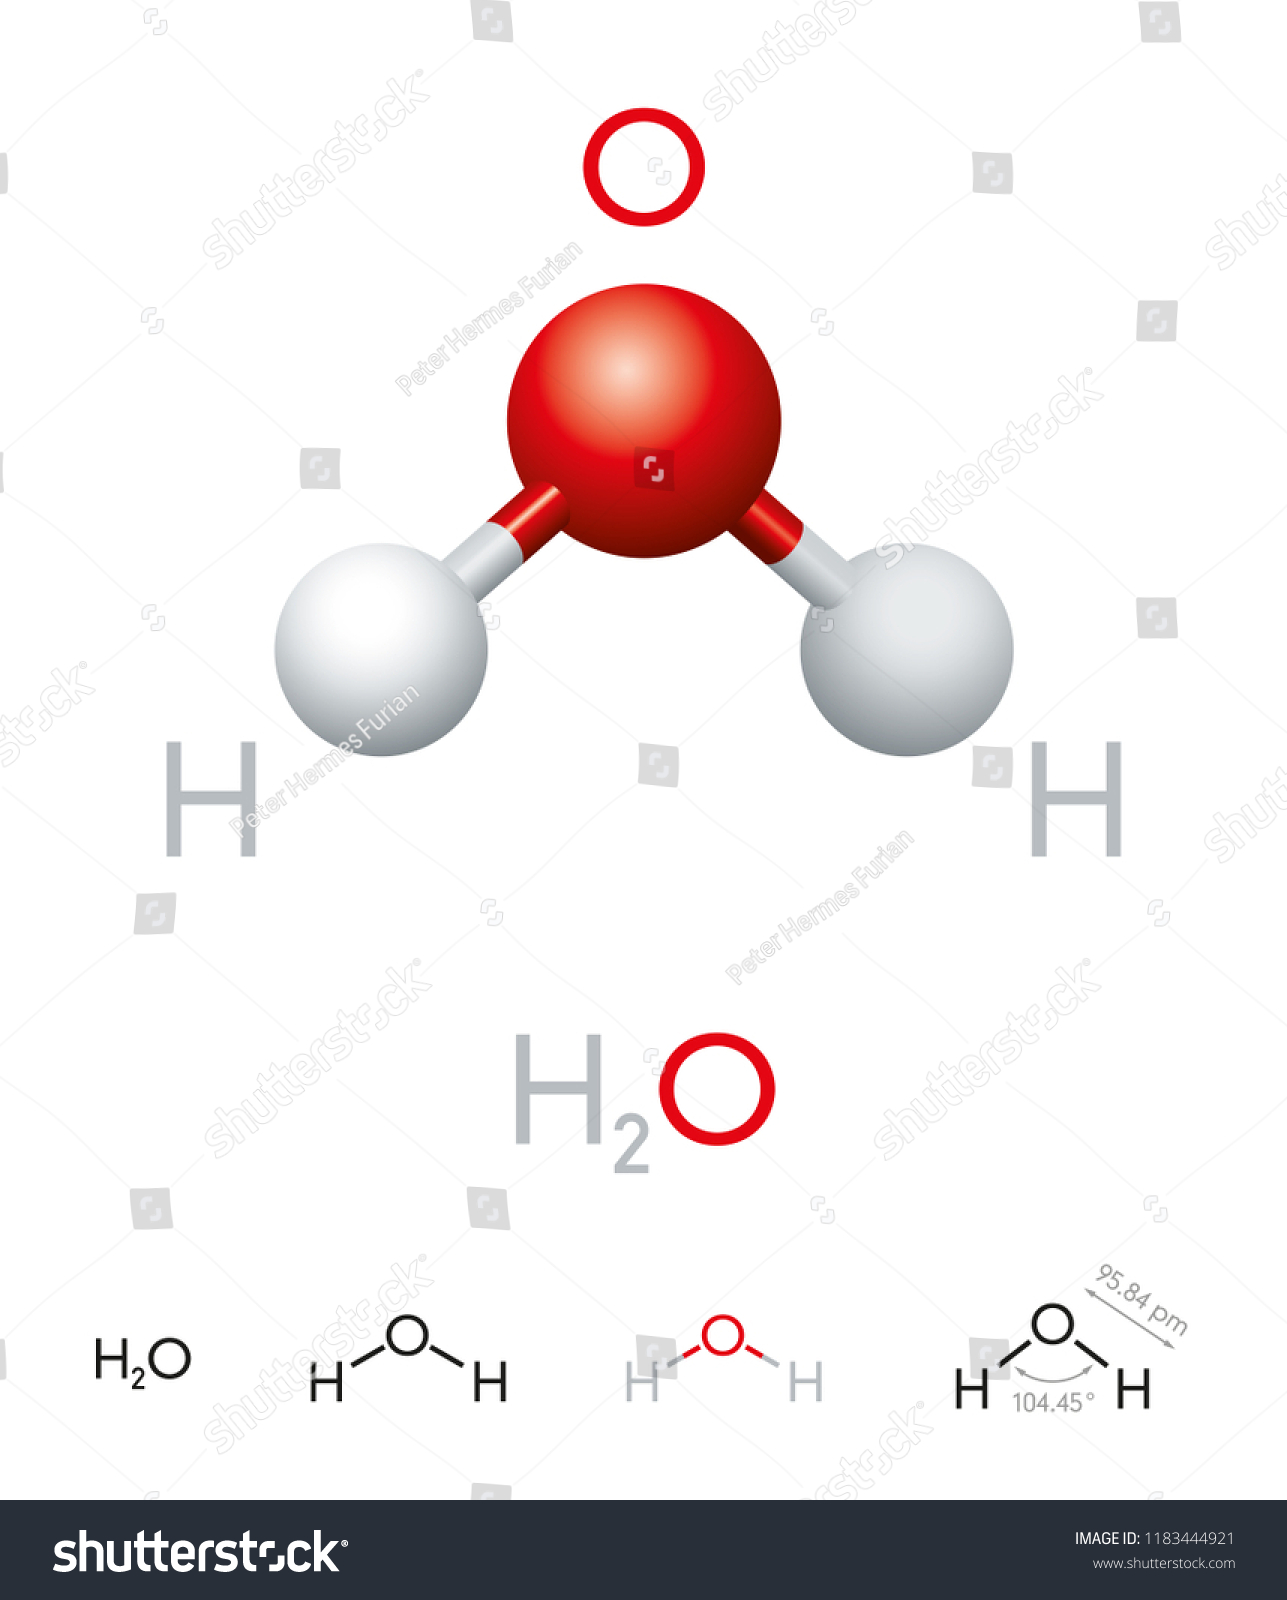 stock-vector-h-o-water-molecule-model-chemical-formula-ball-and-stick-model-geometric-structure-and-1183444921.jpg